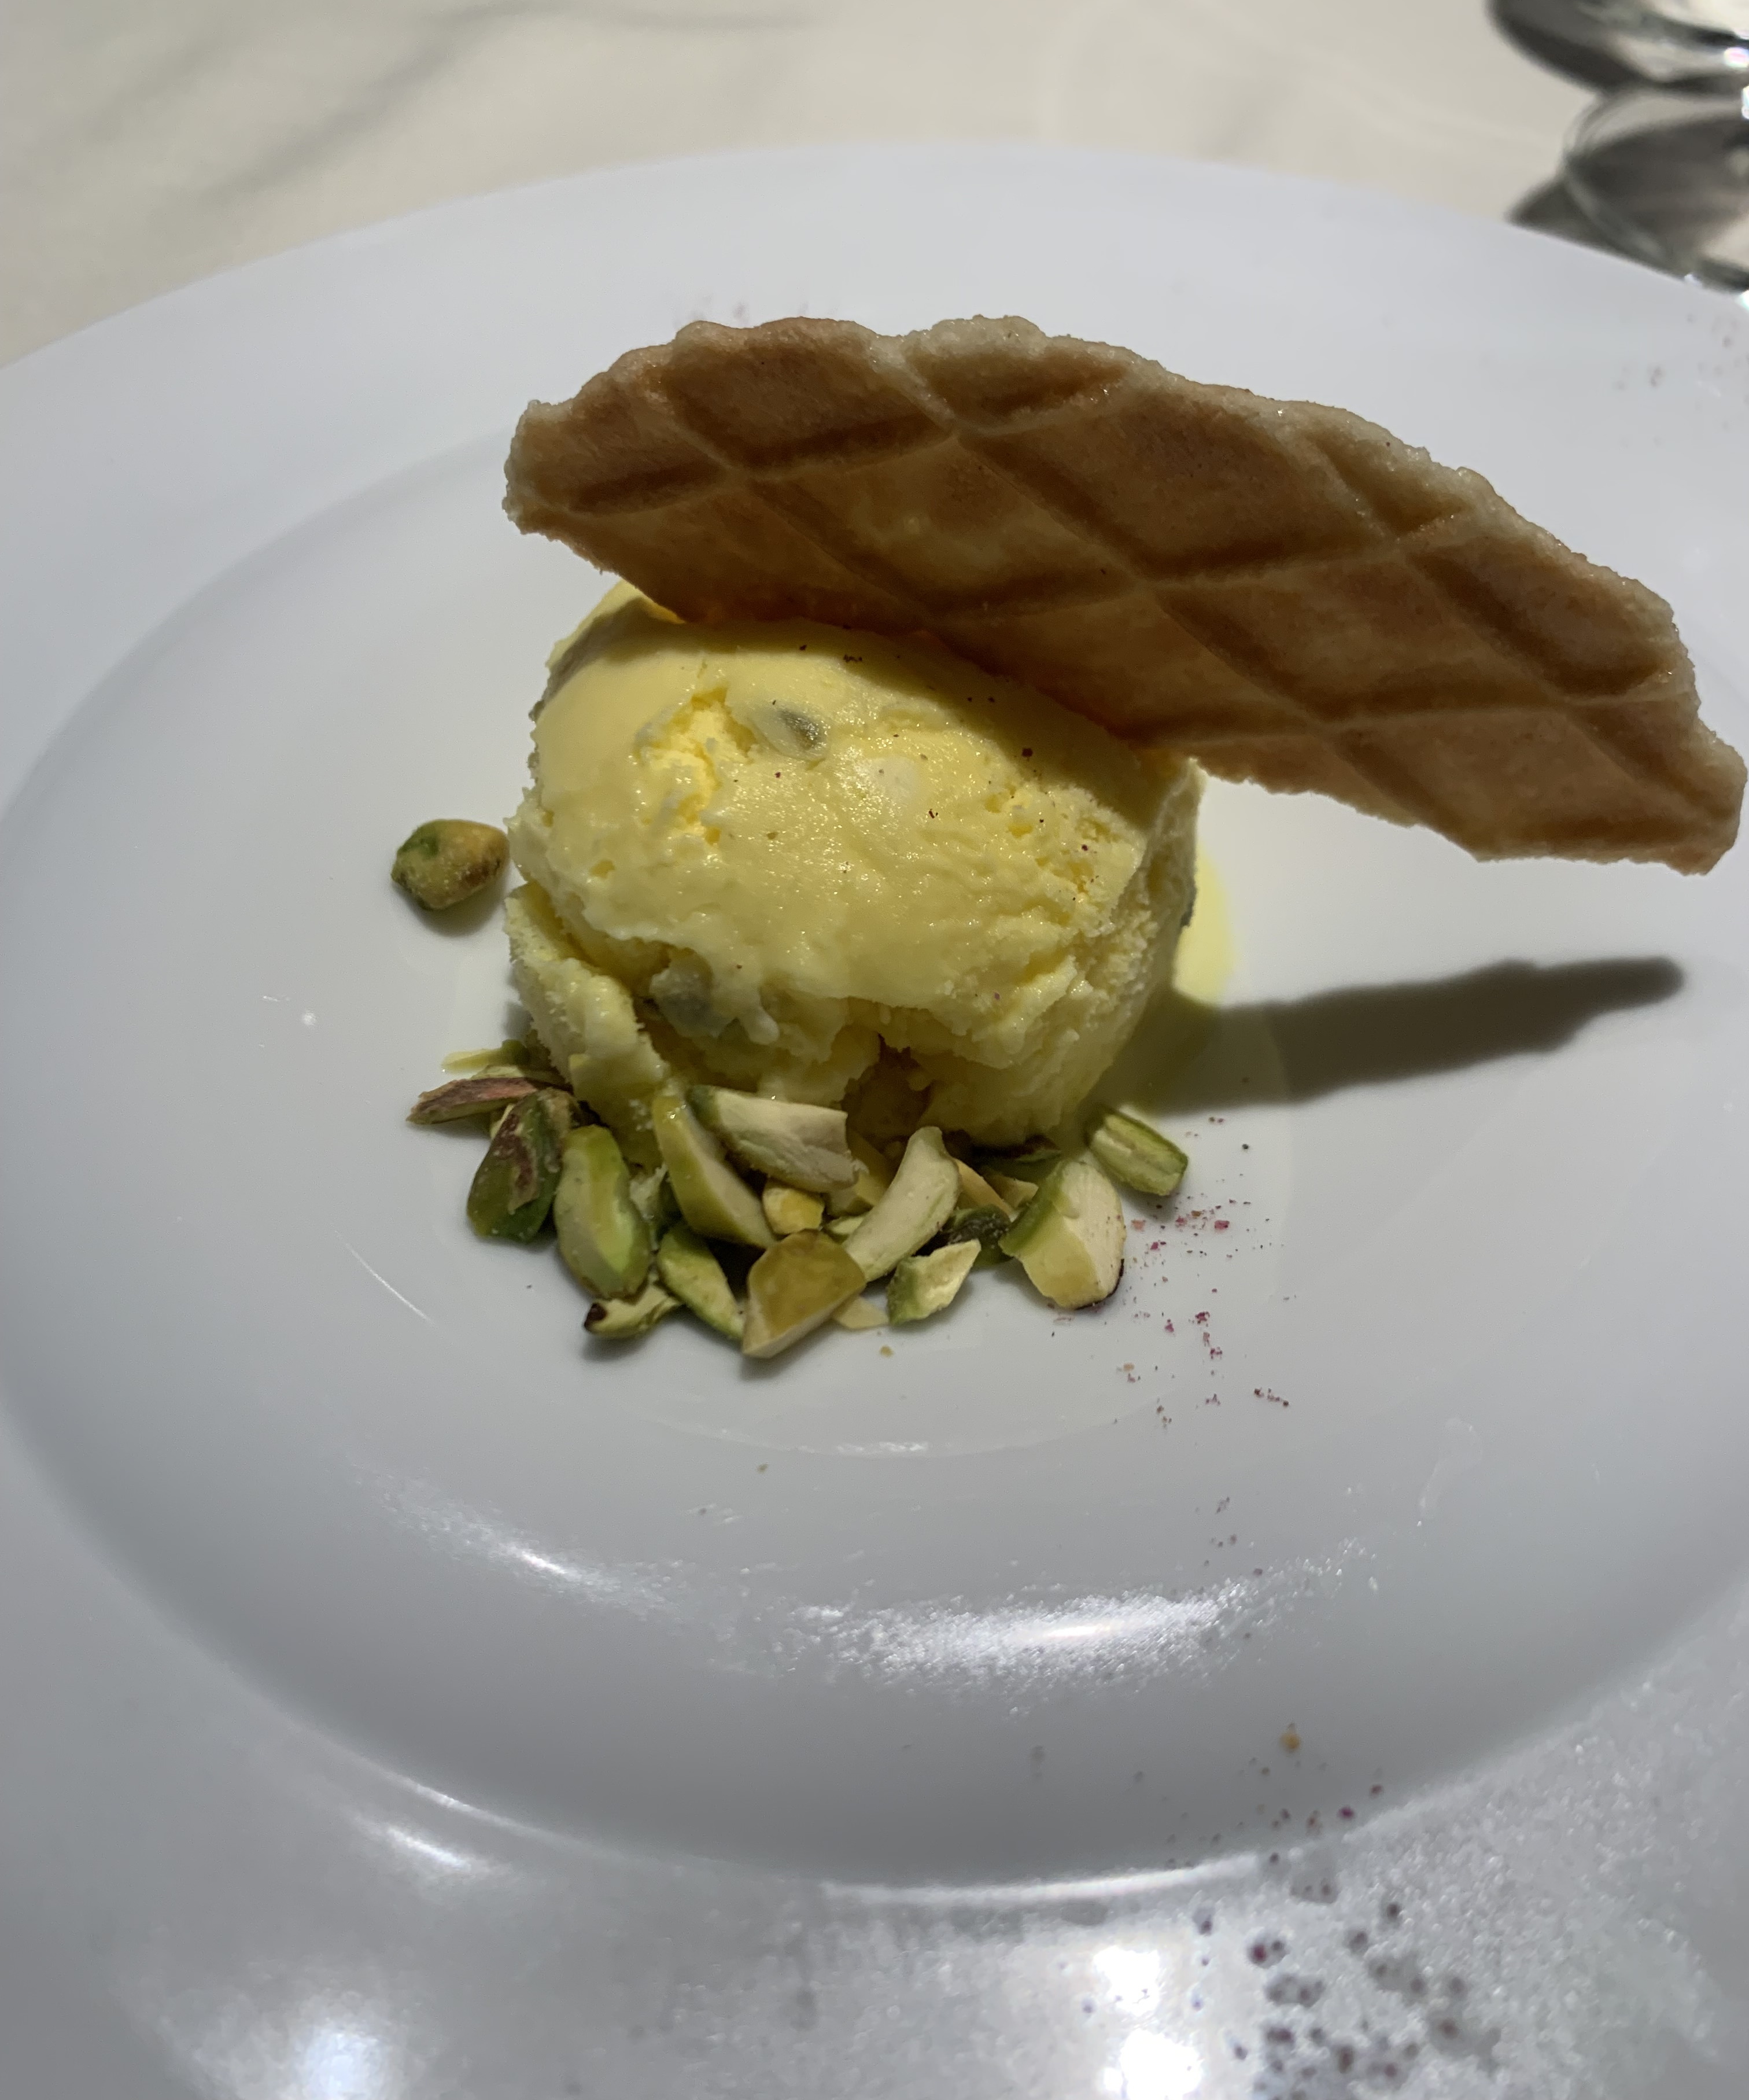 Scoop of yellow ice cream with a shard of waffle cone sticking out of it. A few chopped pistachios surround the ice cream.